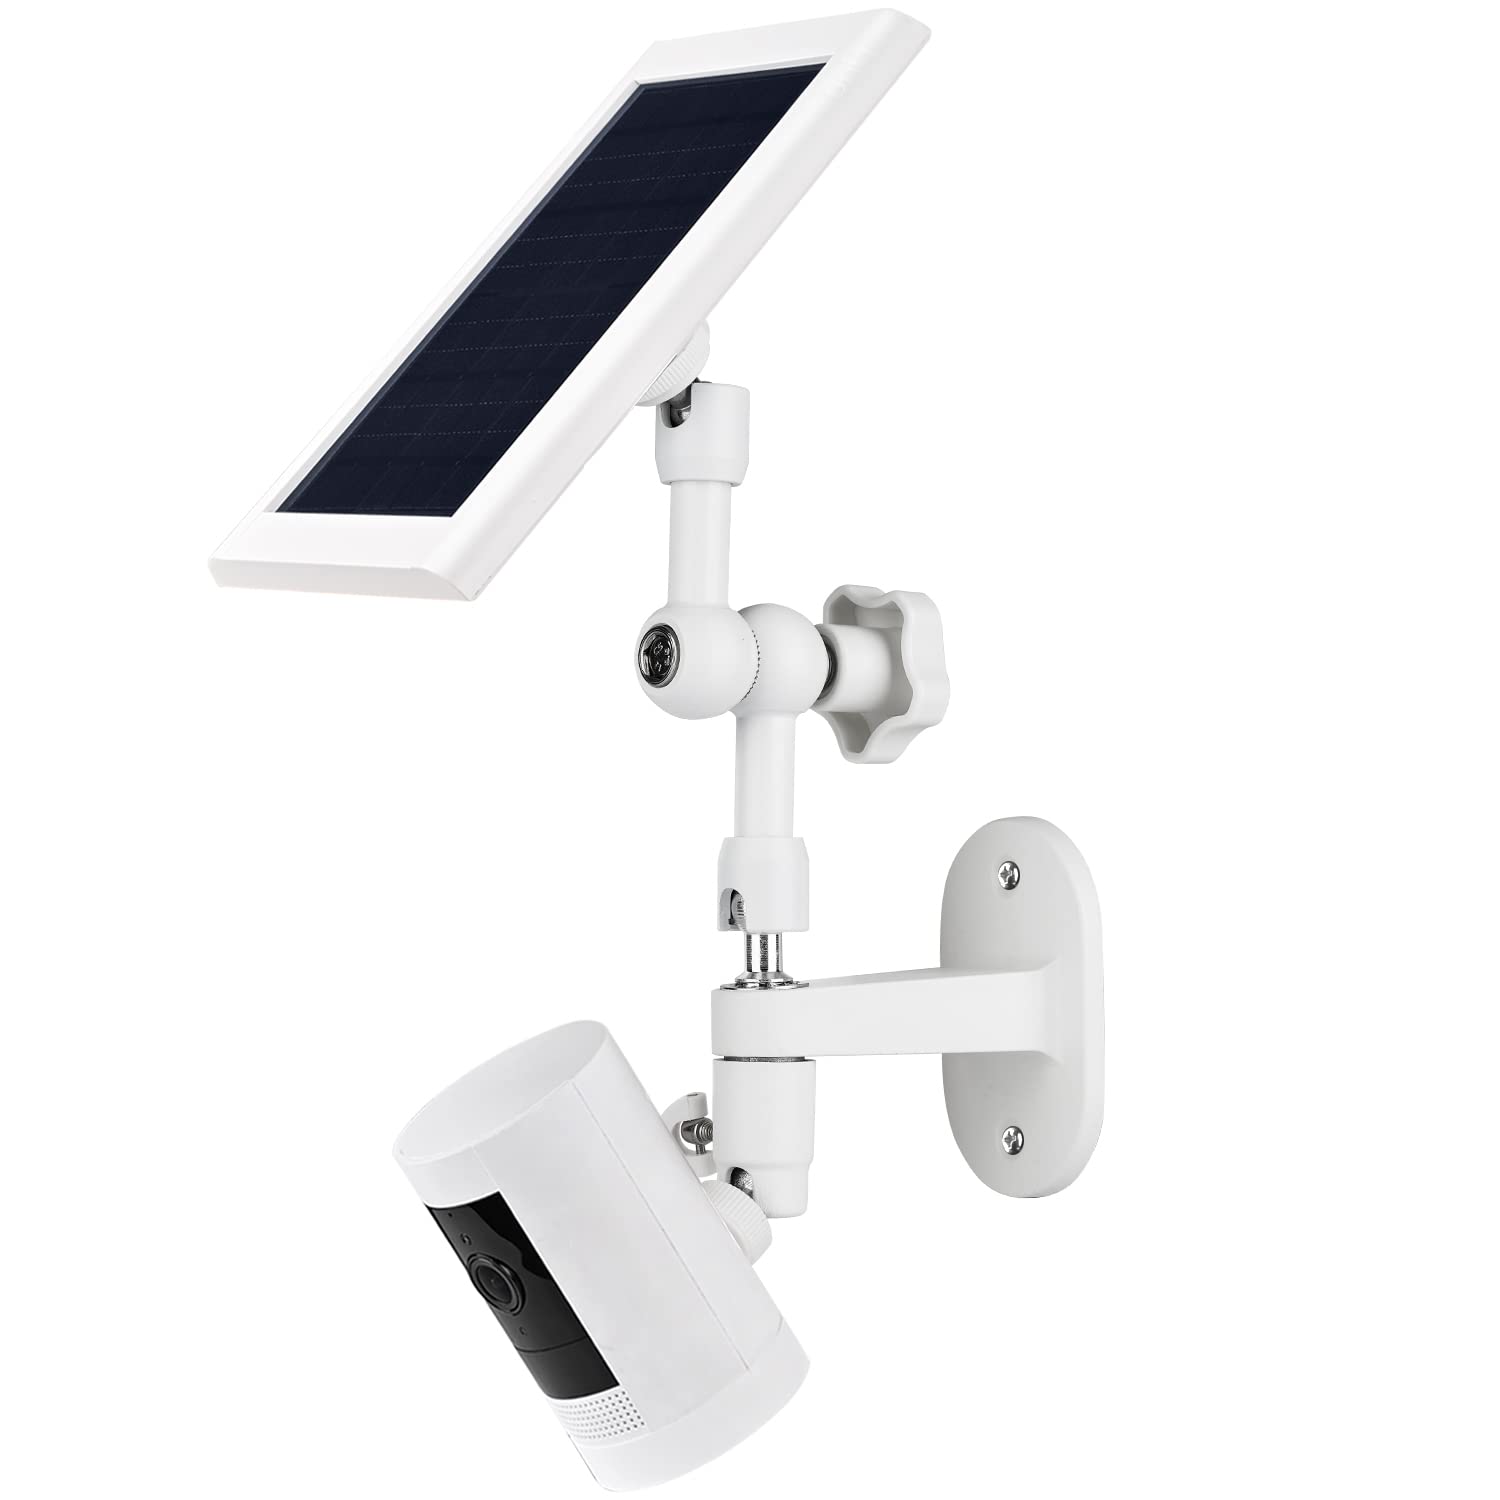 Optimize Sunlight Exposure with 2-in-1 Wall Mount for Ring Solar Panel and Cameras